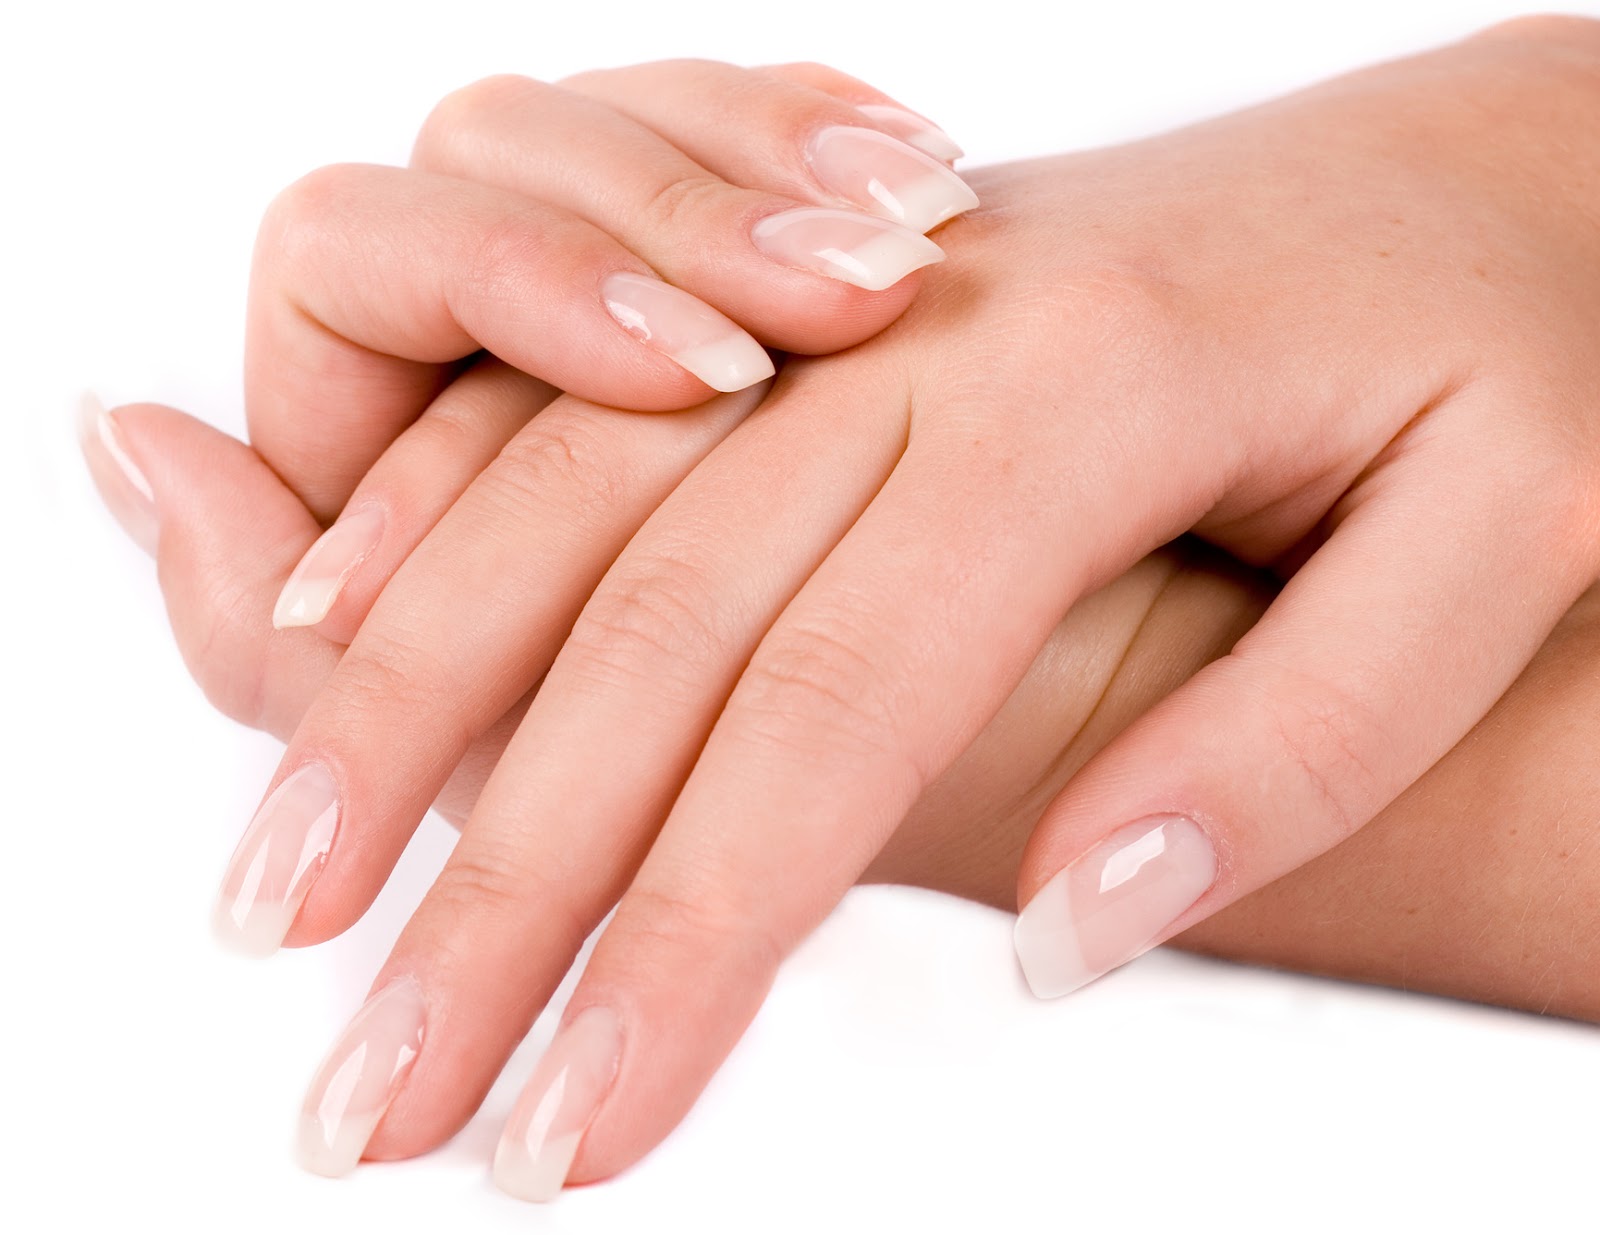 5. "Korean Nail Care Tips for Healthy Nails" - wide 3